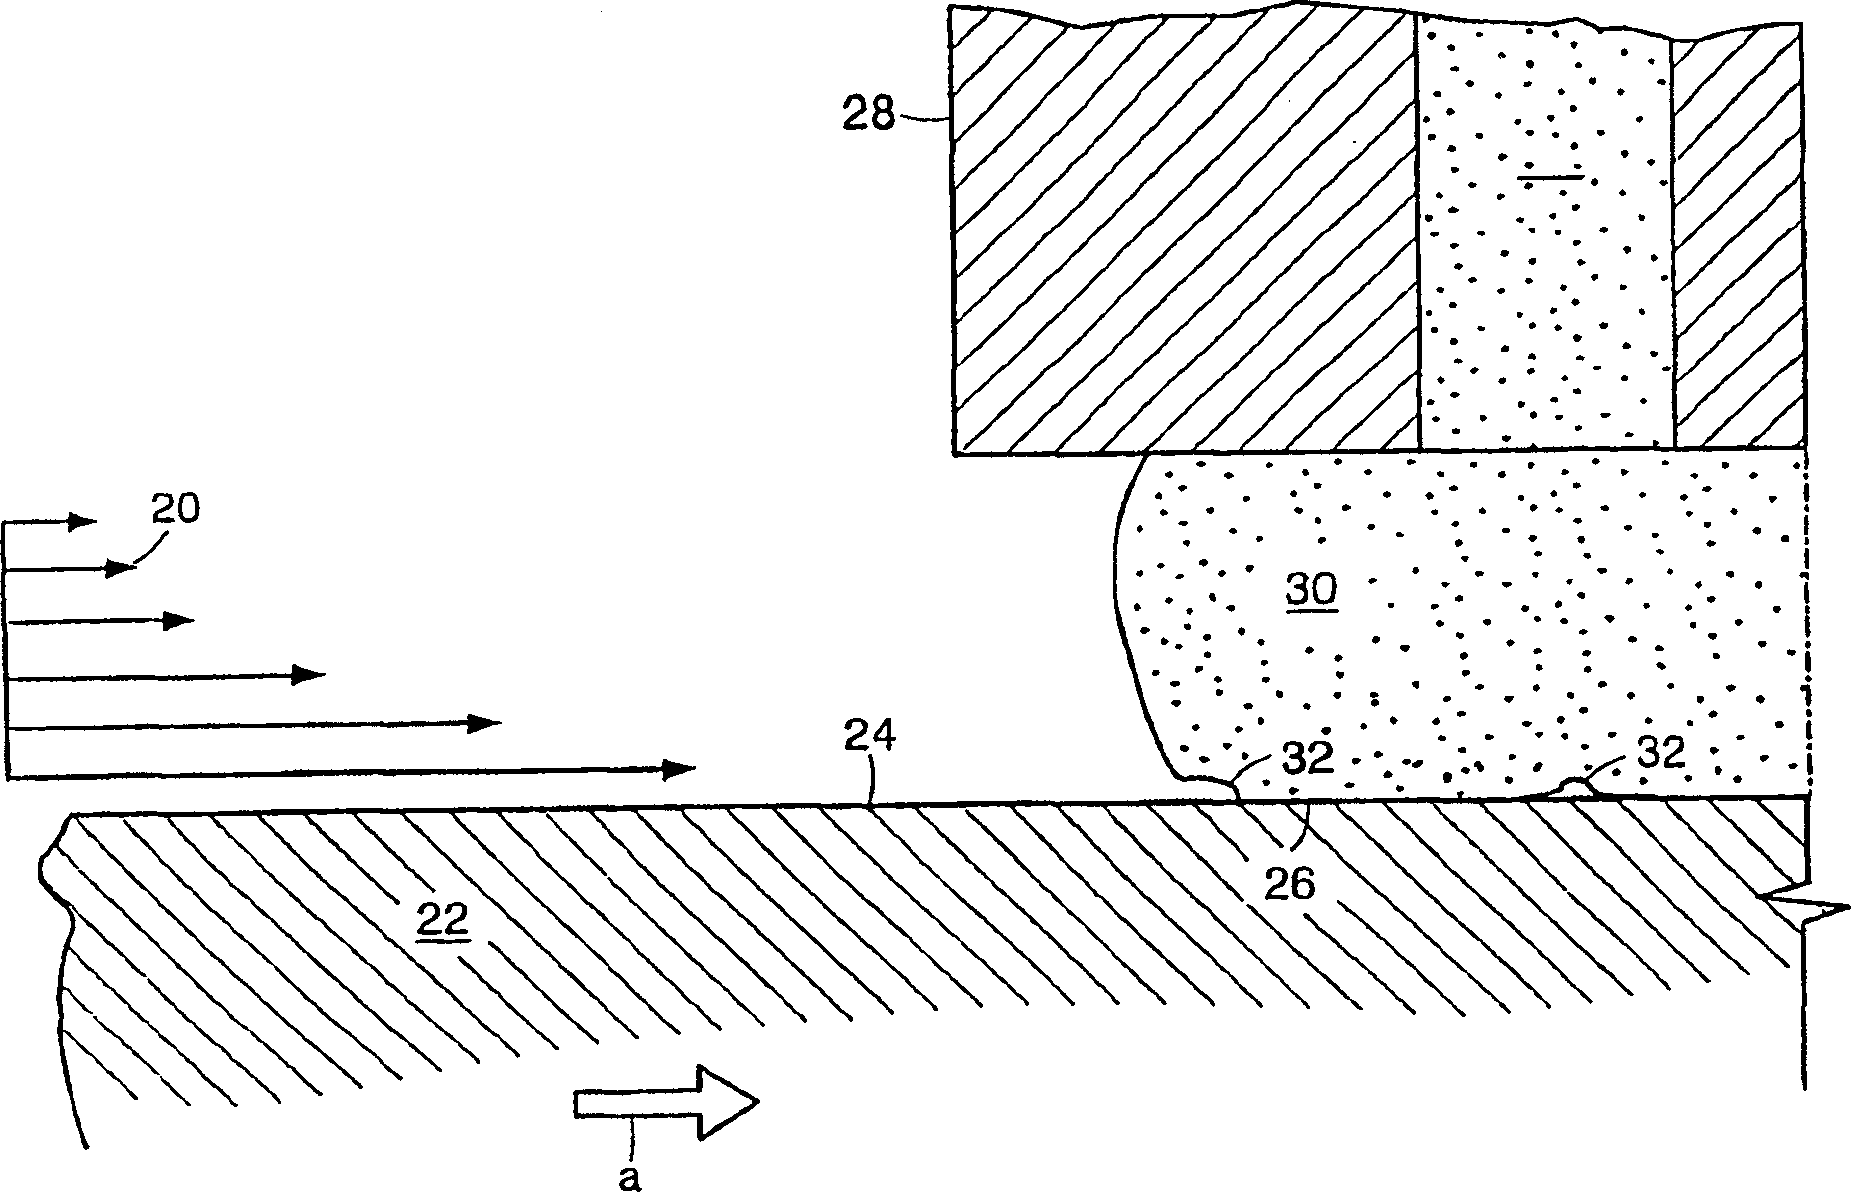 Apparatus and method for casting amorphous metal alloys in an adjustable low density atmosphere